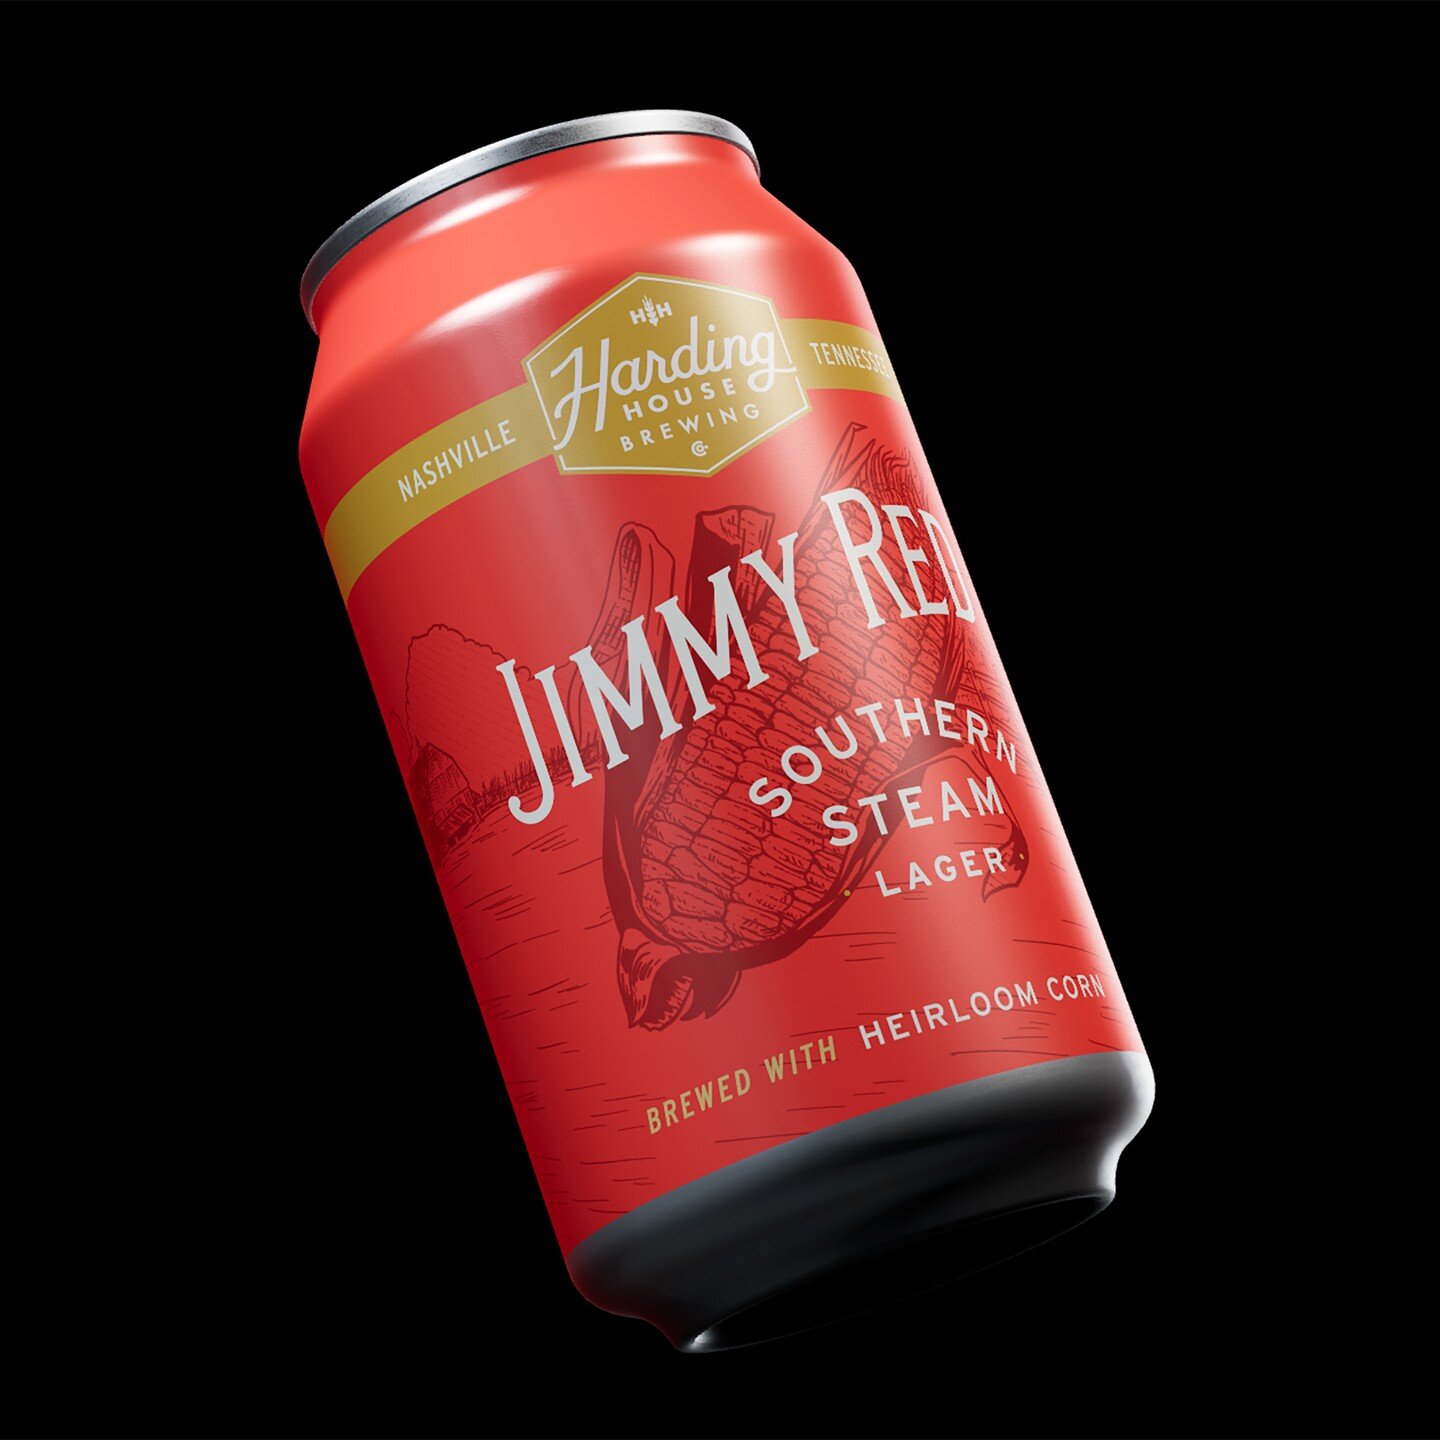 Excited to share the latest can design for @hardinghousebrew &mdash; Jimmy Red Southern Steam Lager.

⬅️ Swipe for a few fun detail shots.

This is my favorite can design to date, and I'm pretty passionate about how the design came to be. Read on if 